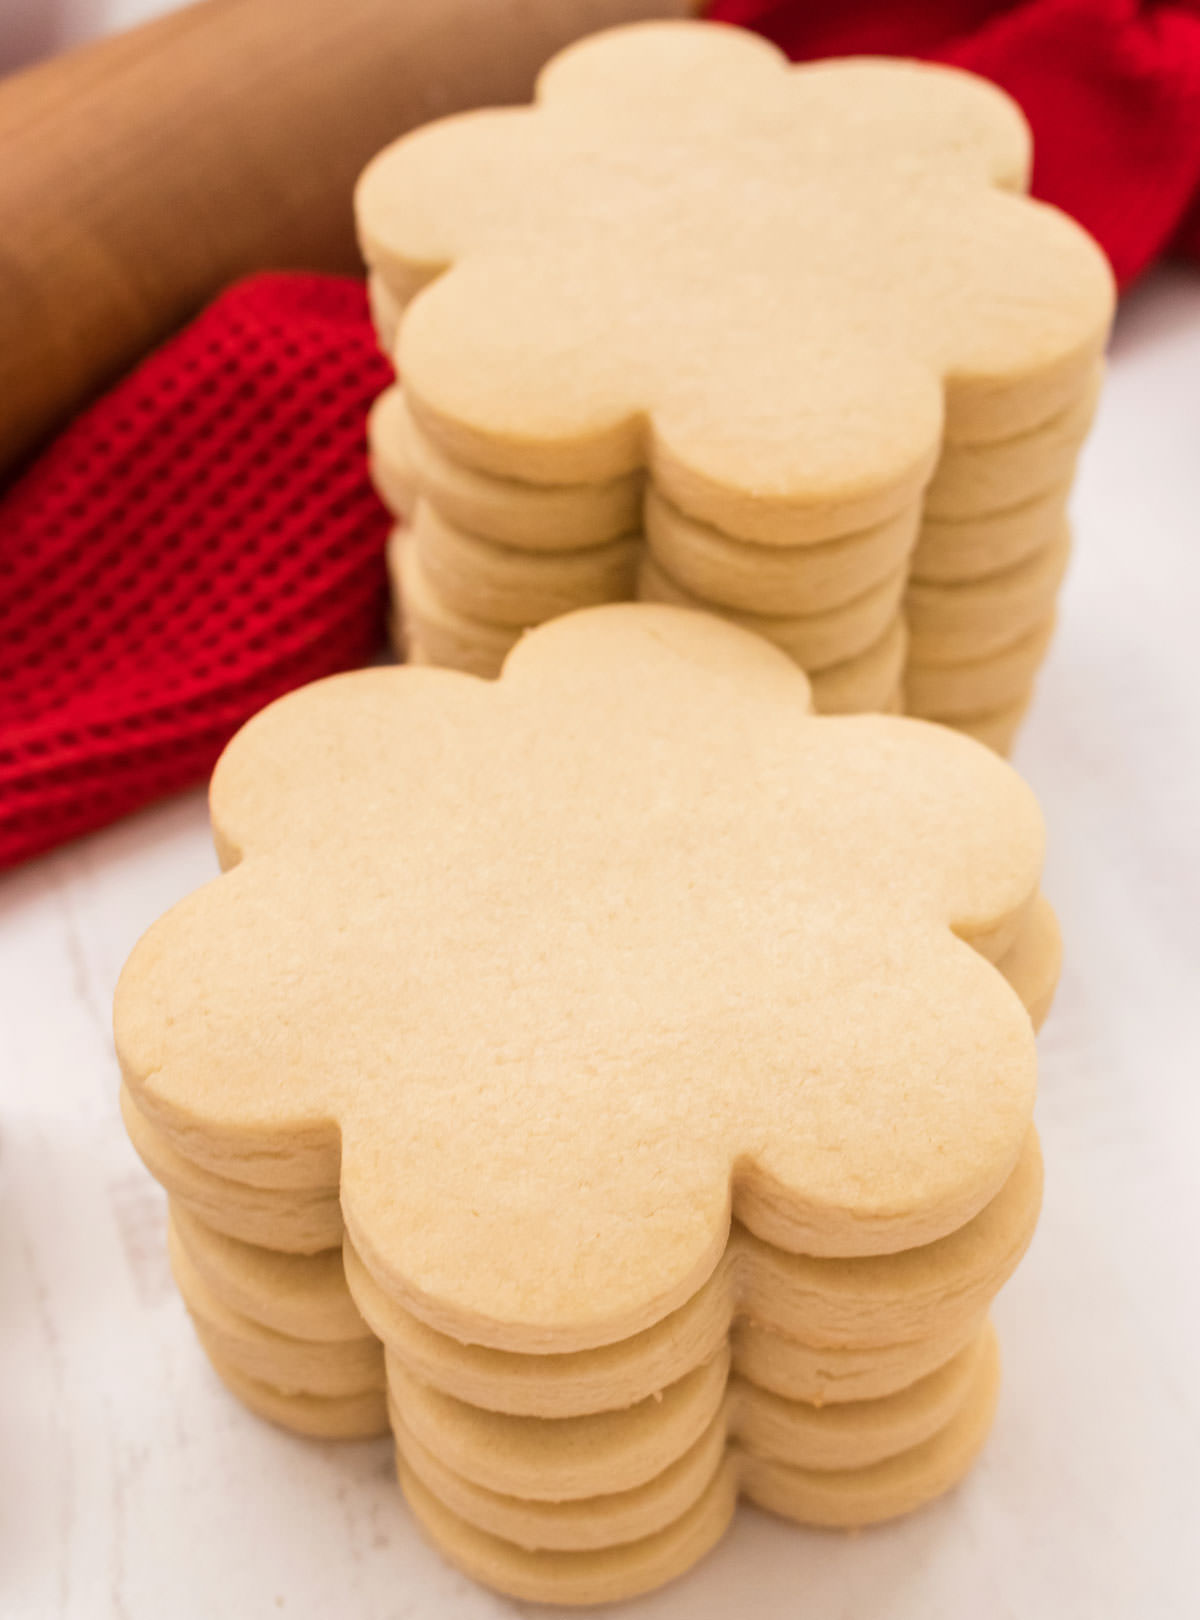 Closeup on two stacks of perfect flower sugar cookies made from our The Best Sugar Cookie Recipe sitting in front of a red towel and a wooden rolling pin.